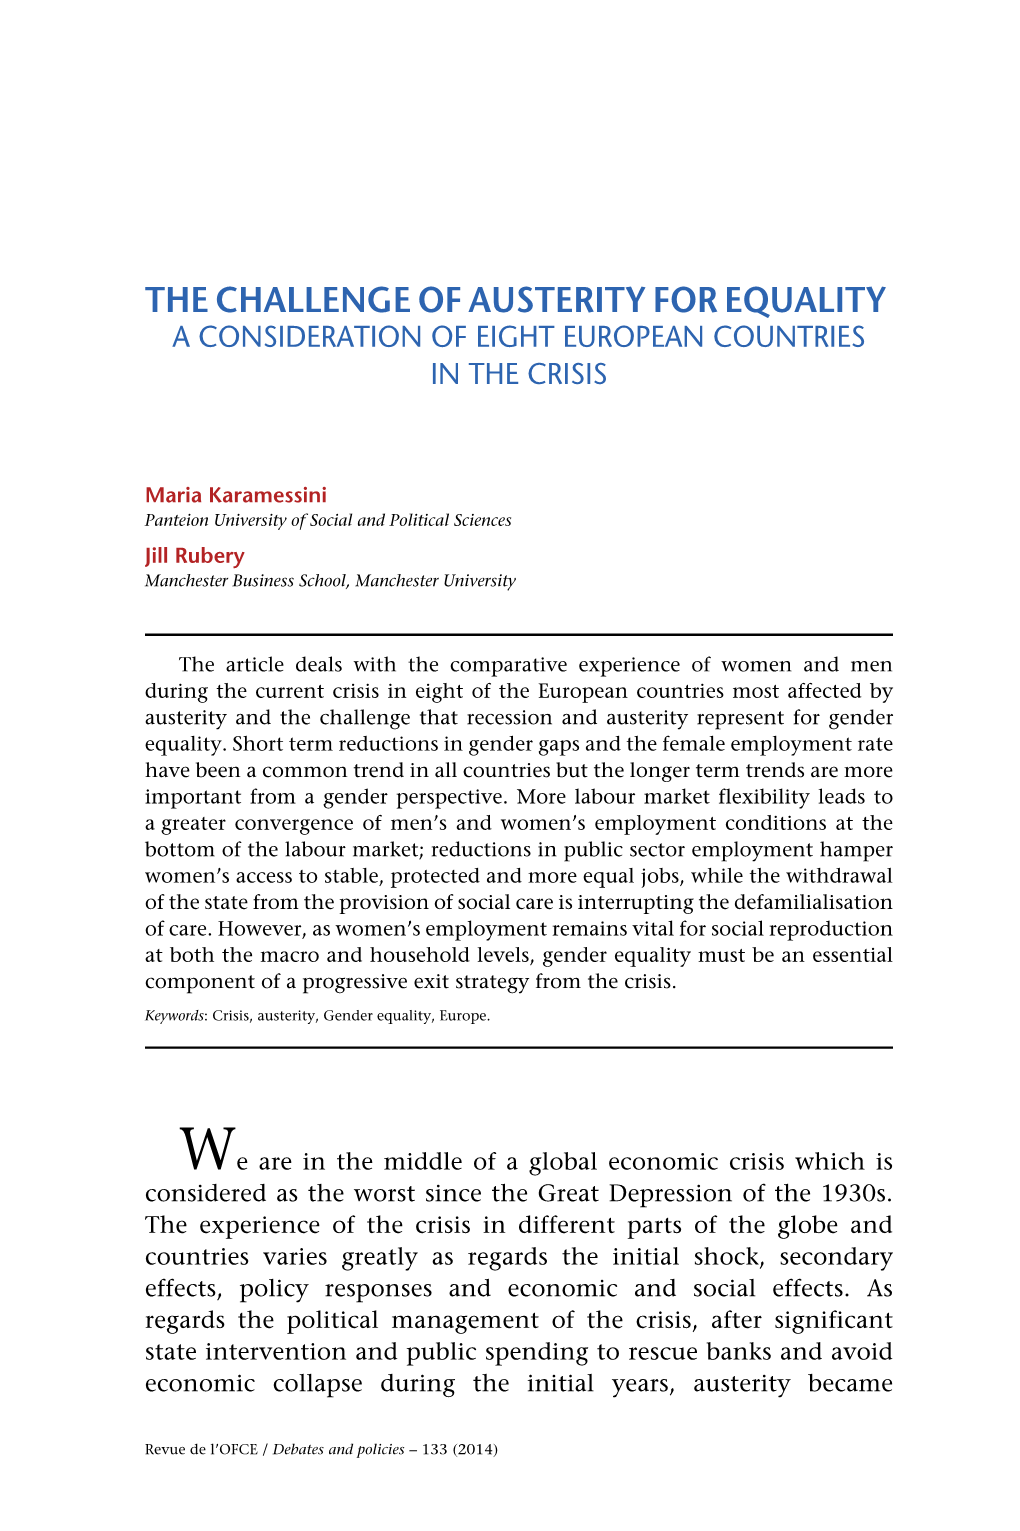 The Challenge of Austerity for Equality a Consideration of Eight European Countries in the Crisis